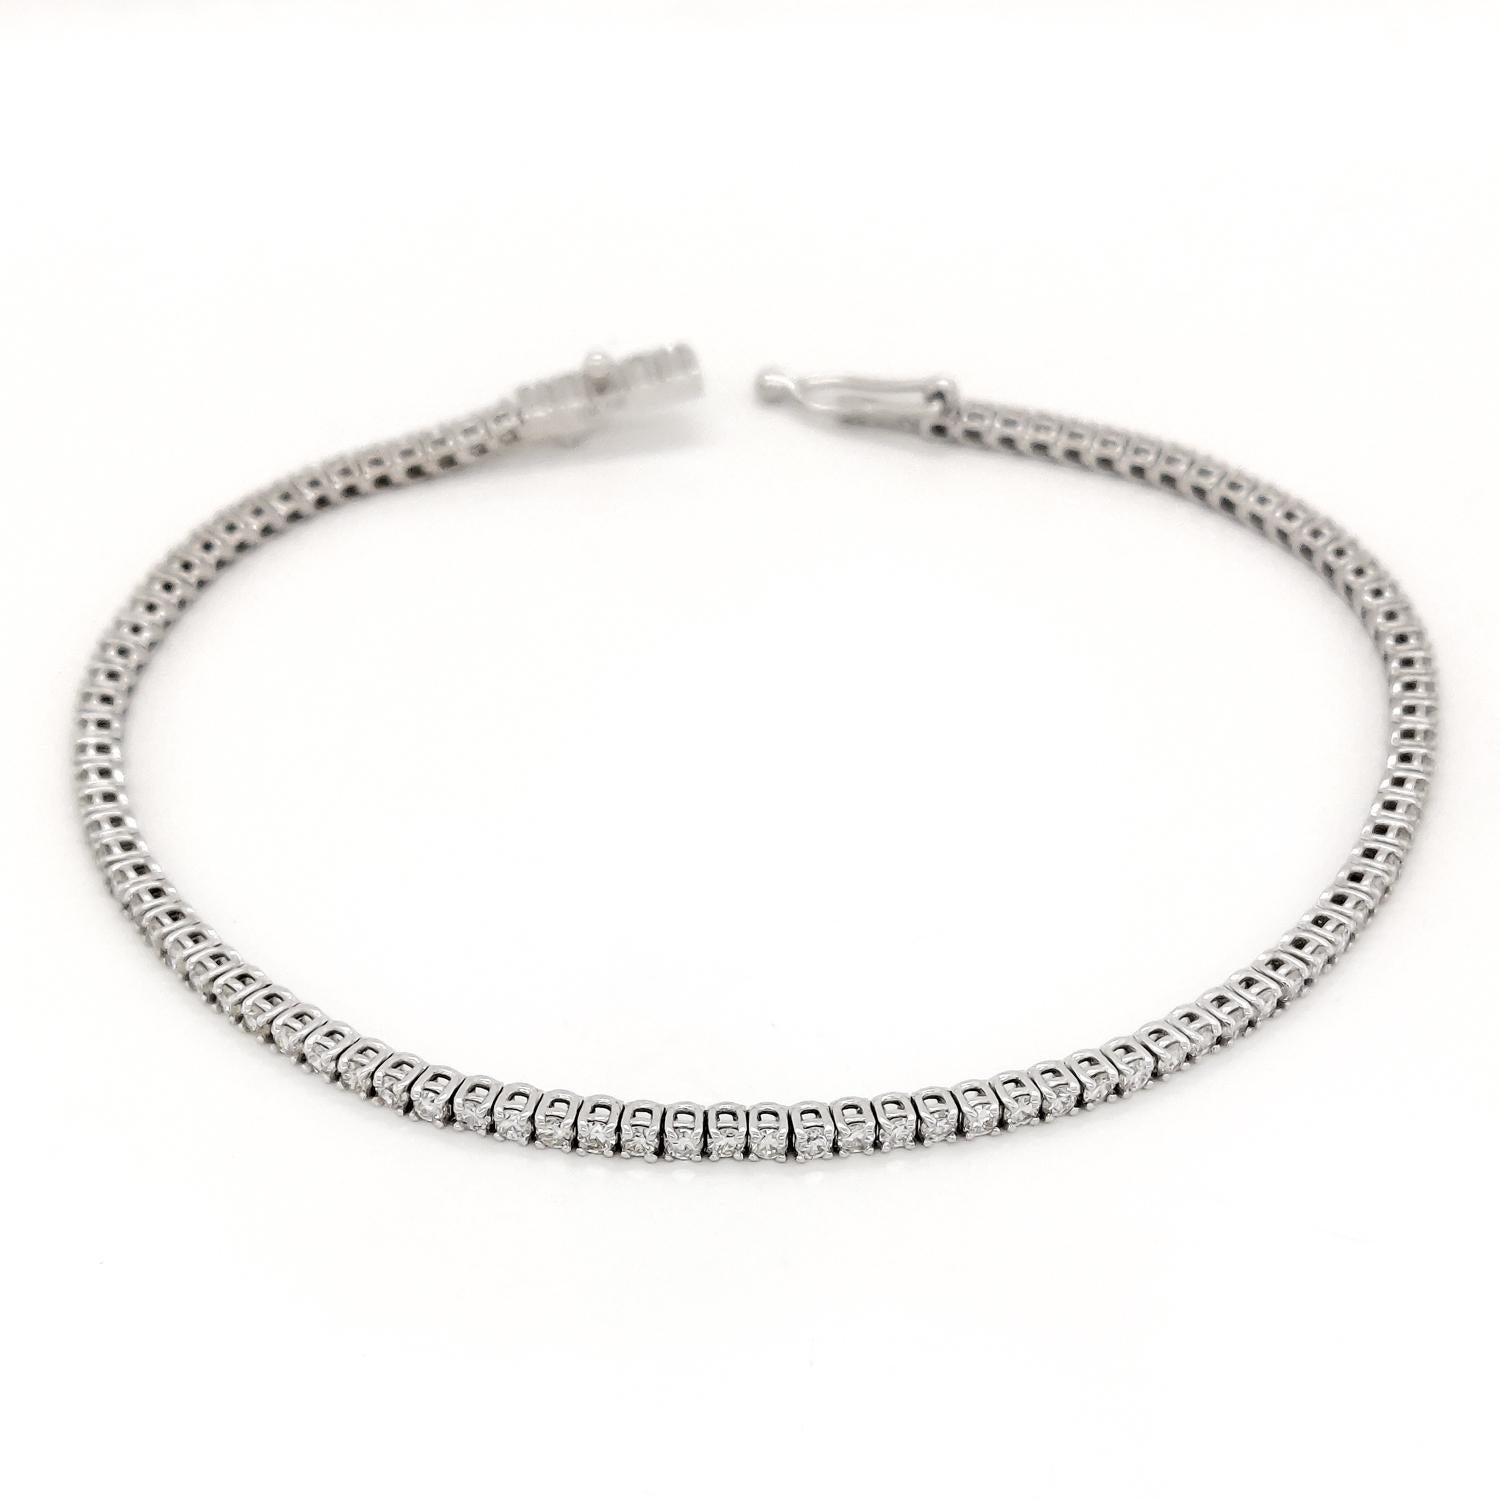 This classic and elegant 14kt white gold tennis bracelet showcases 94 endlessly sparkling diamonds, totaling 2.10 carat. This bracelet will give your favorite outfits unforgettable sparkle. 
For more information, please check the attached